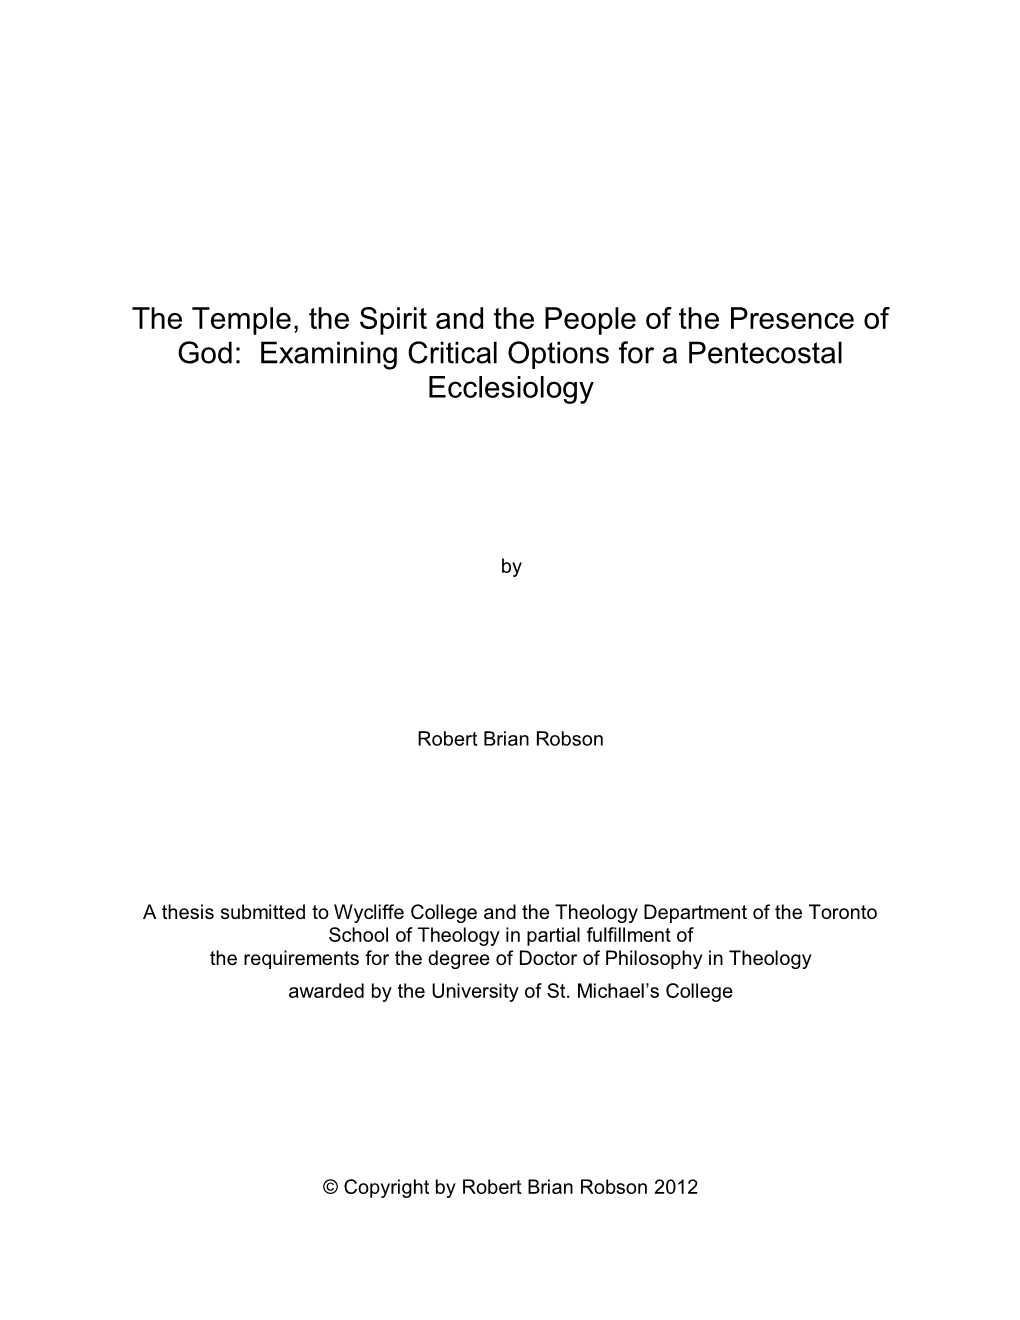 The Temple, the Spirit and the People of the Presence of God: Examining Critical Options for a Pentecostal Ecclesiology